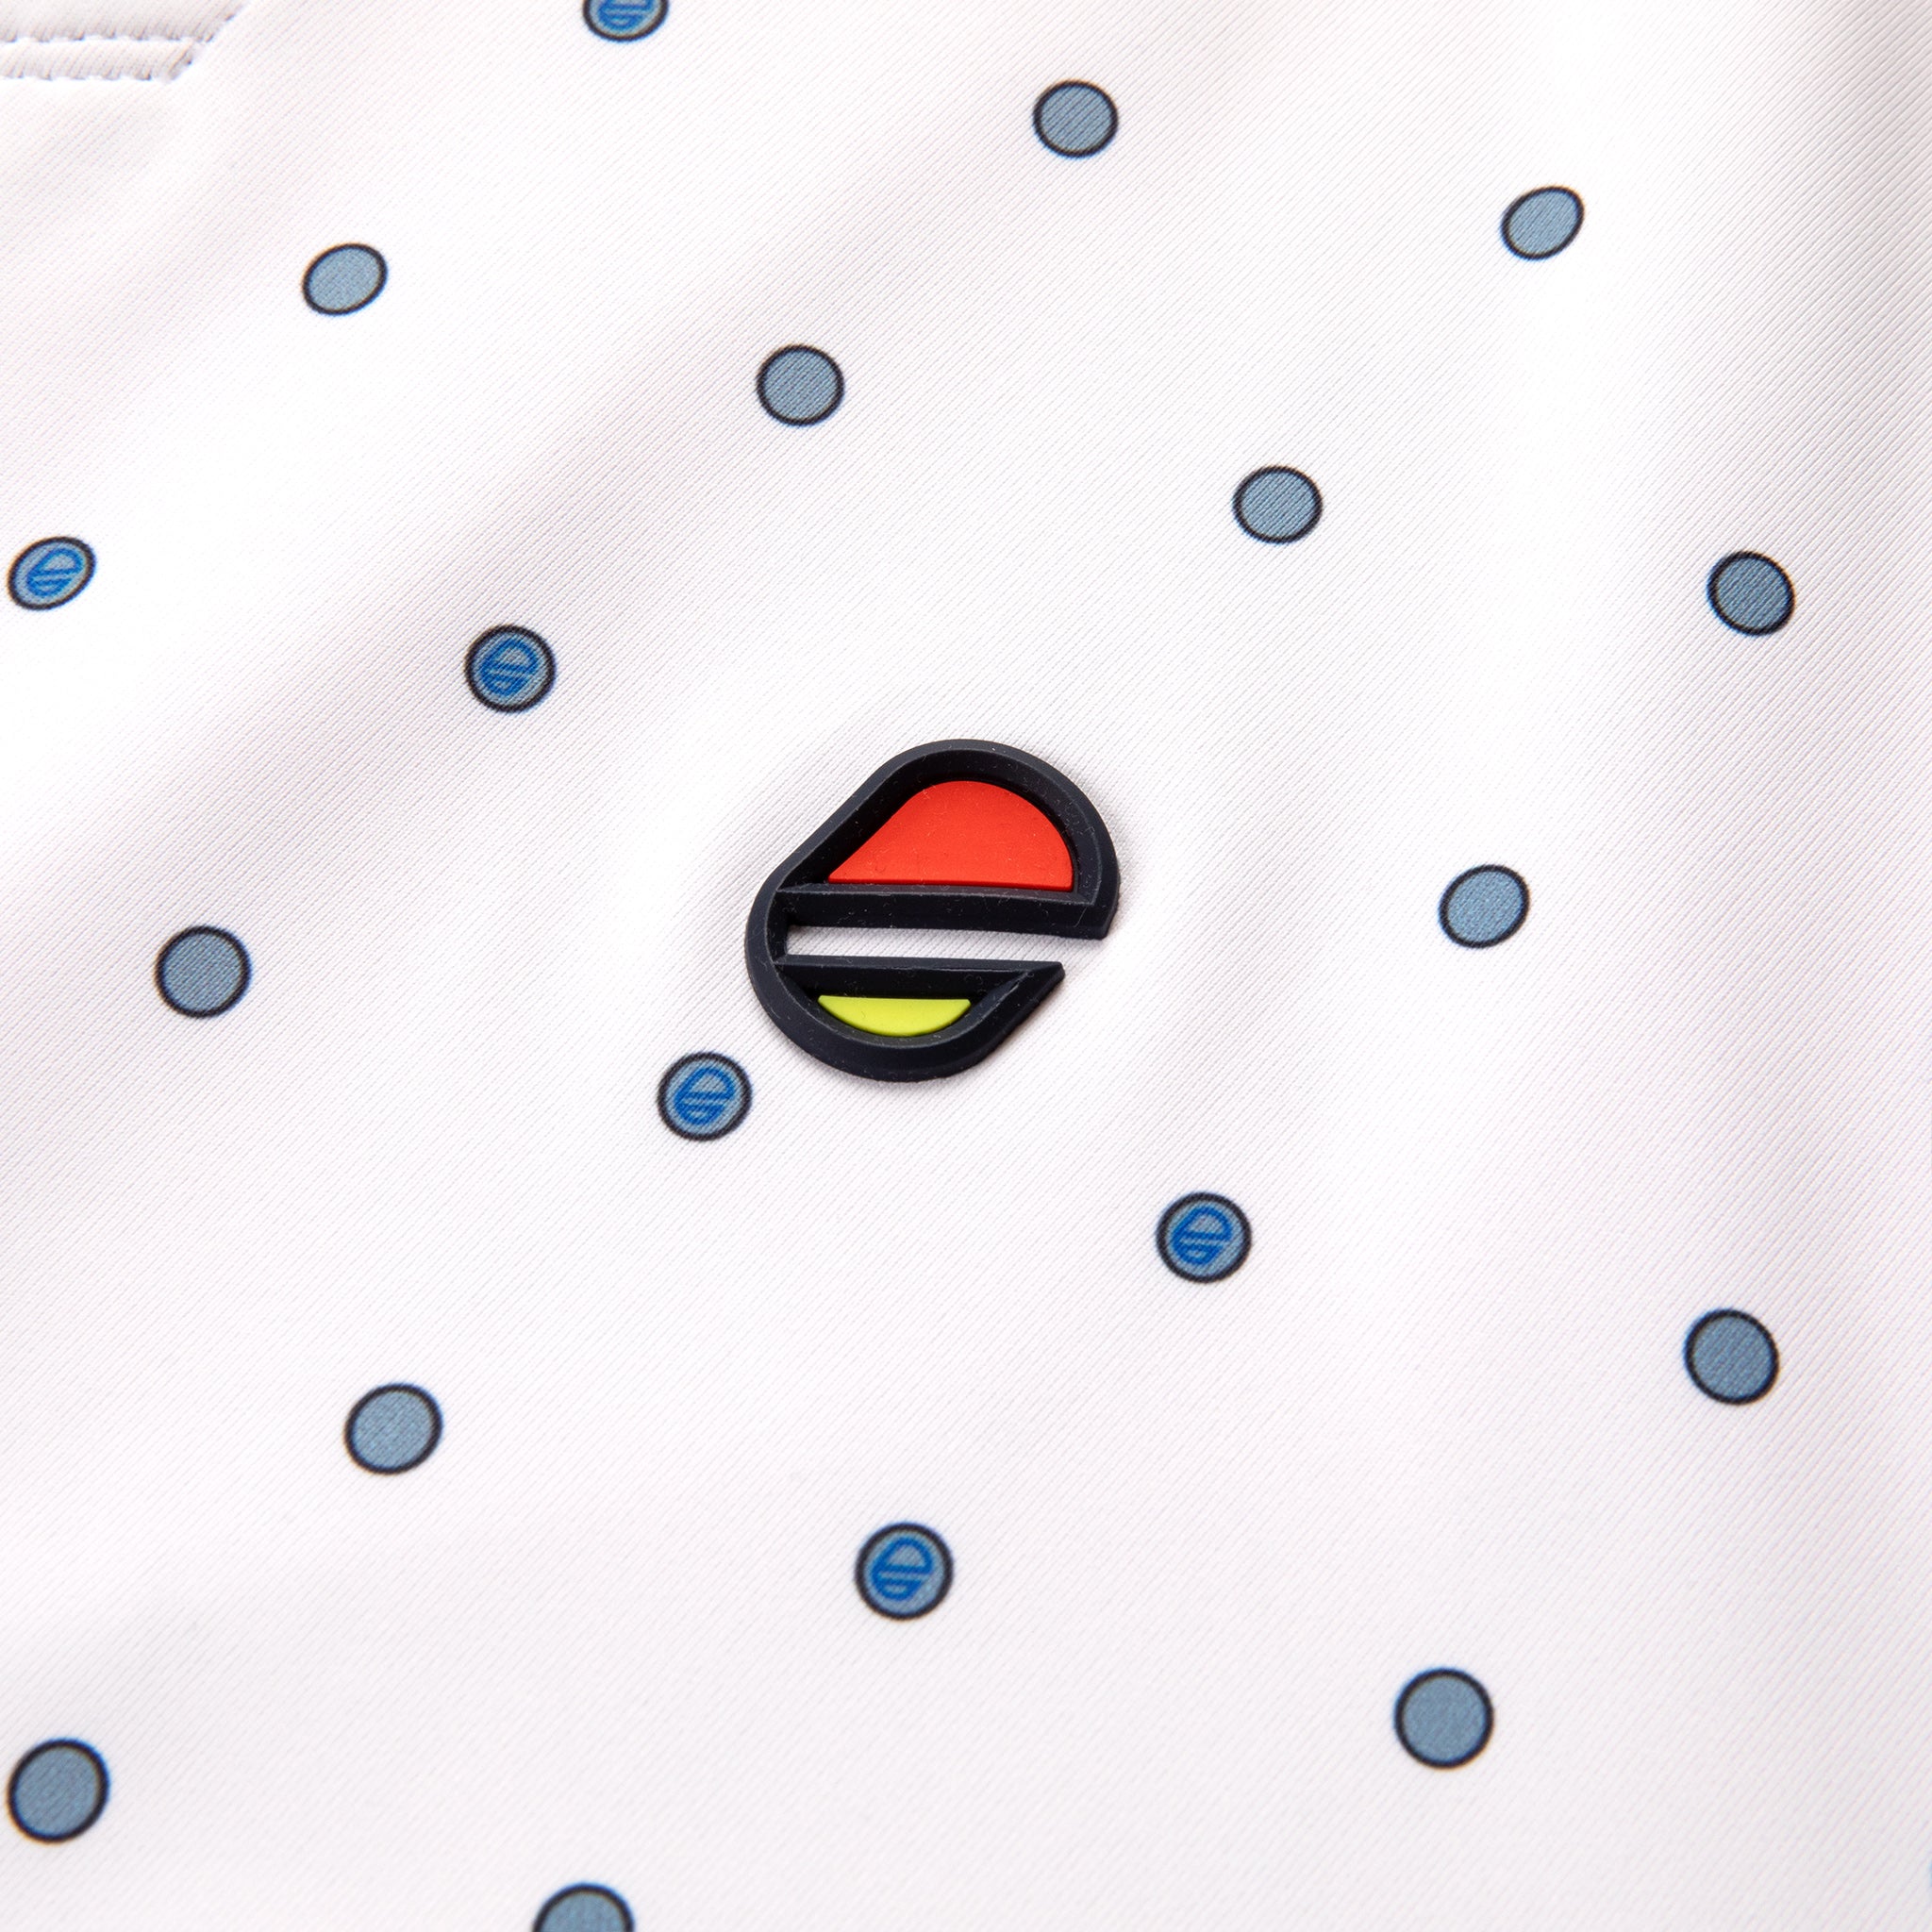 SPOTTED POLO | BRIGHT WHITE DOT